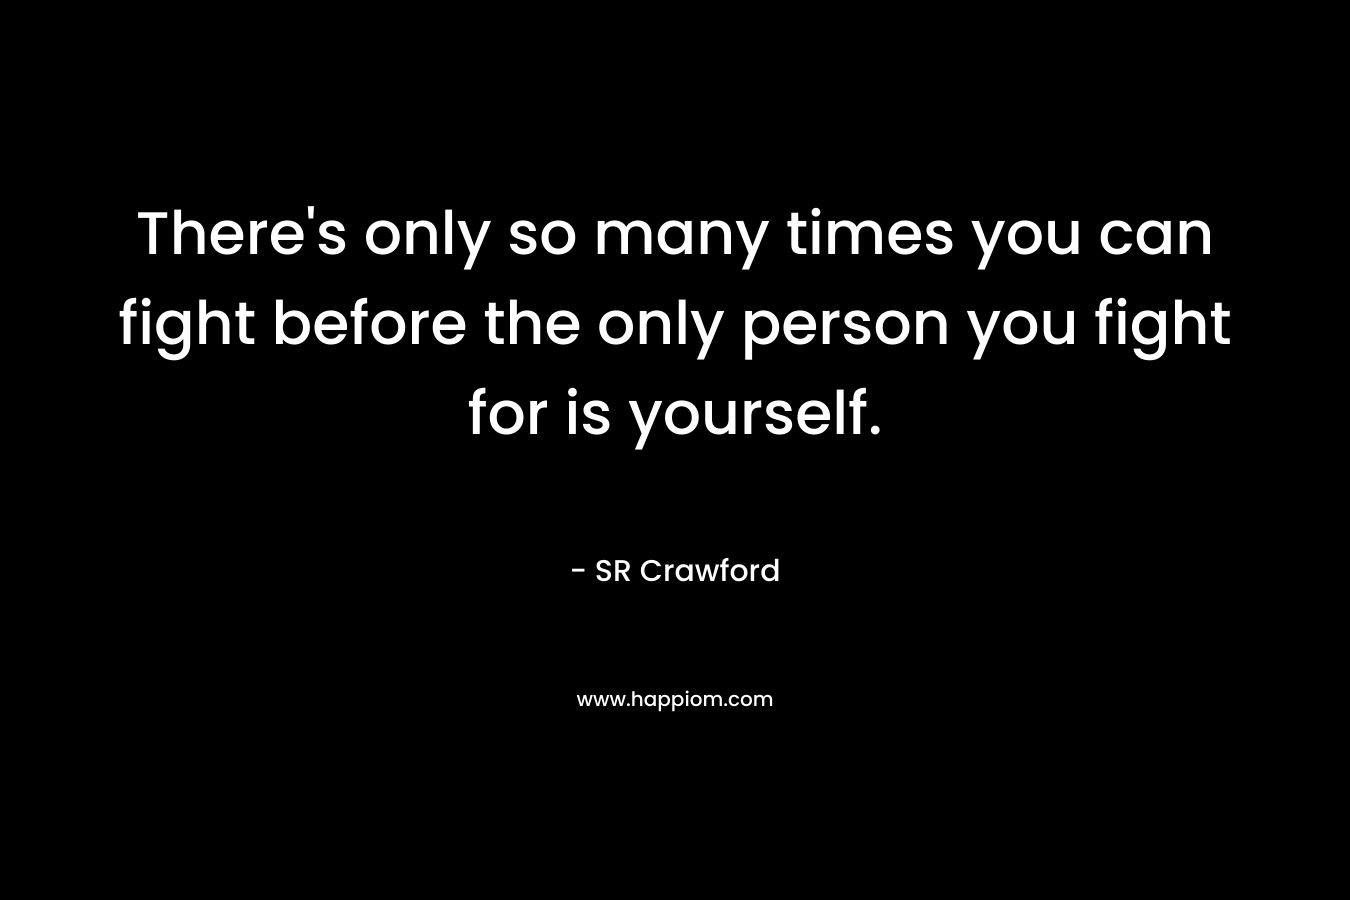 There’s only so many times you can fight before the only person you fight for is yourself. – SR Crawford